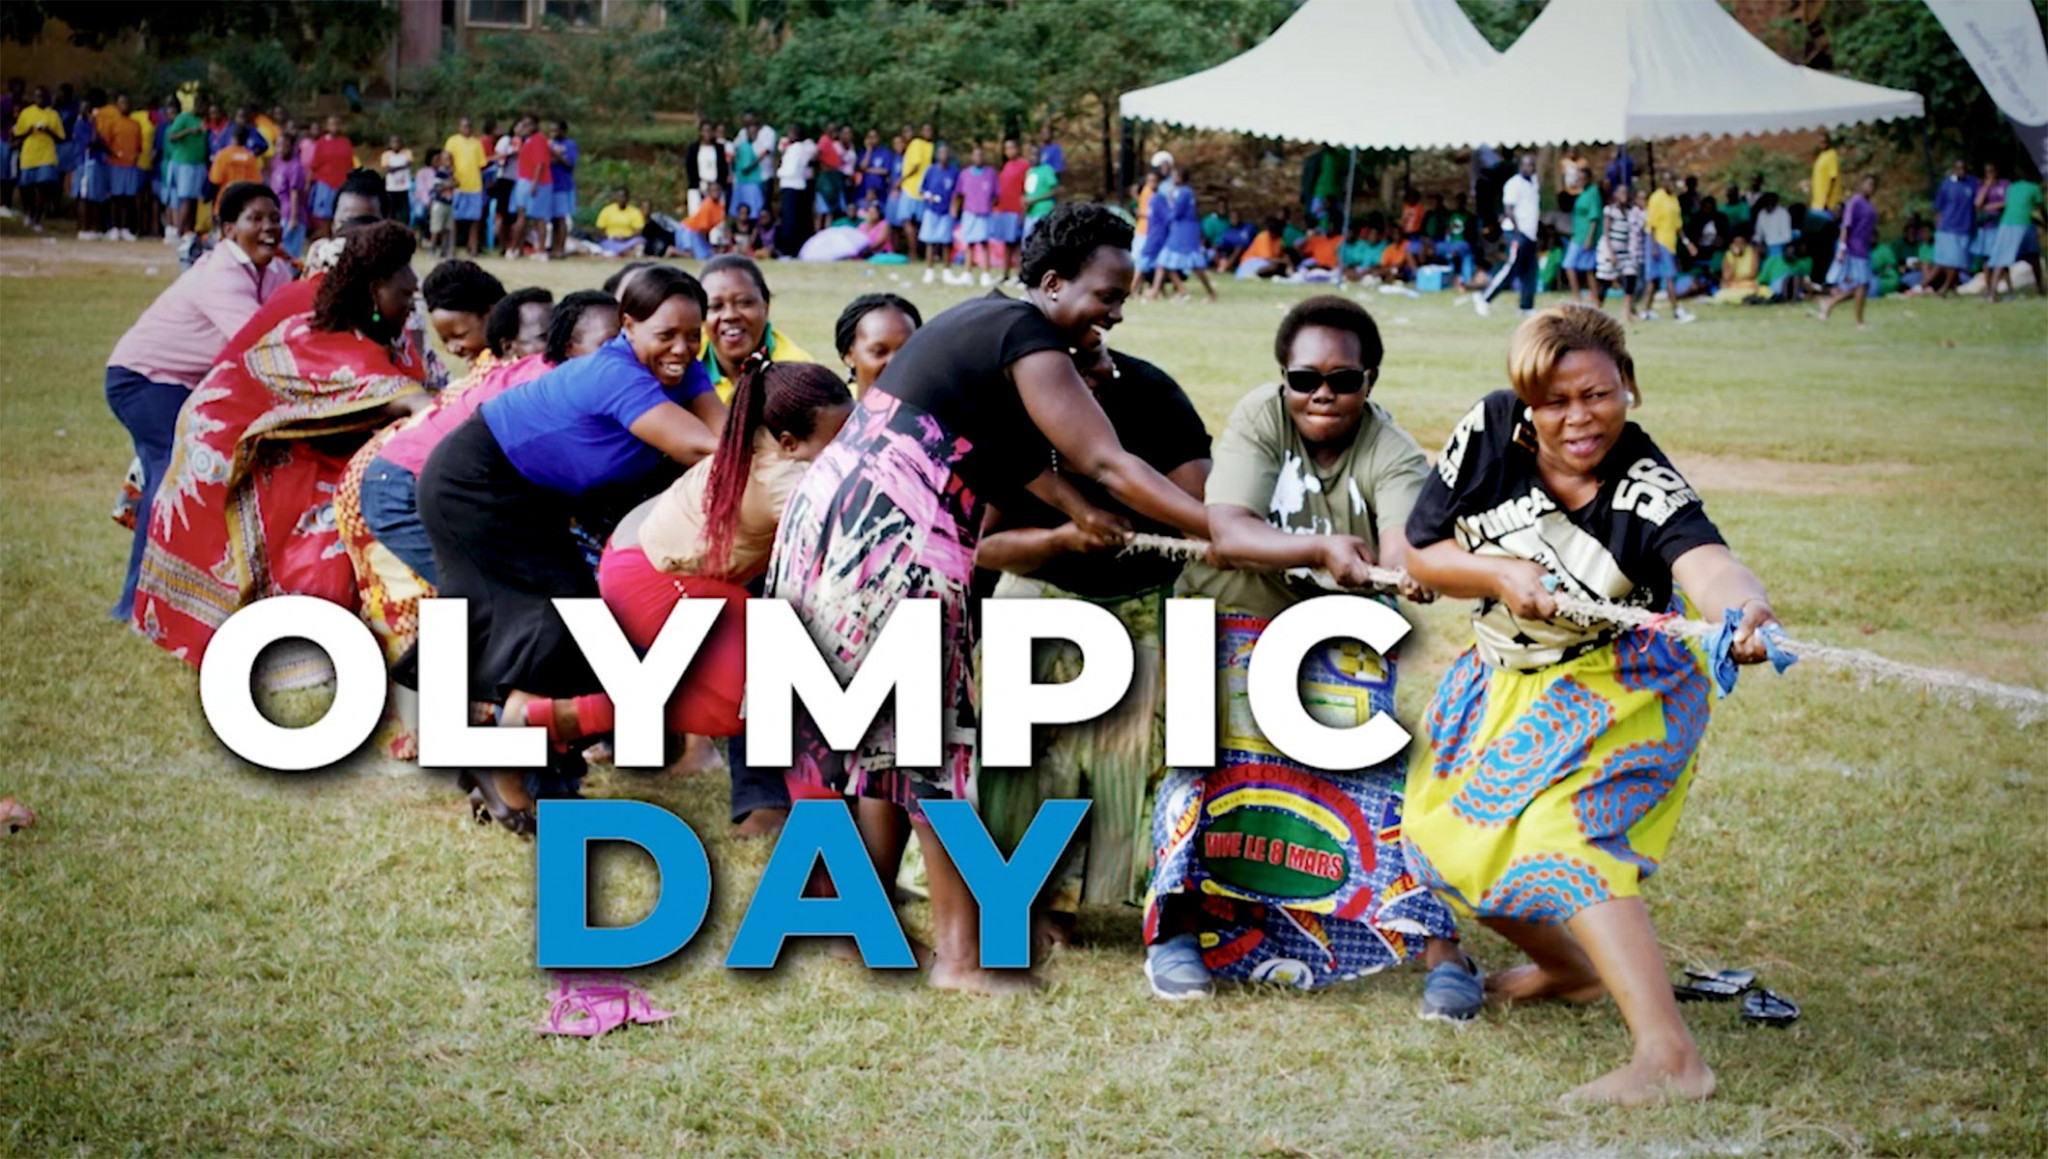 Olympic Day is celebrated around the world ©Olympic.org